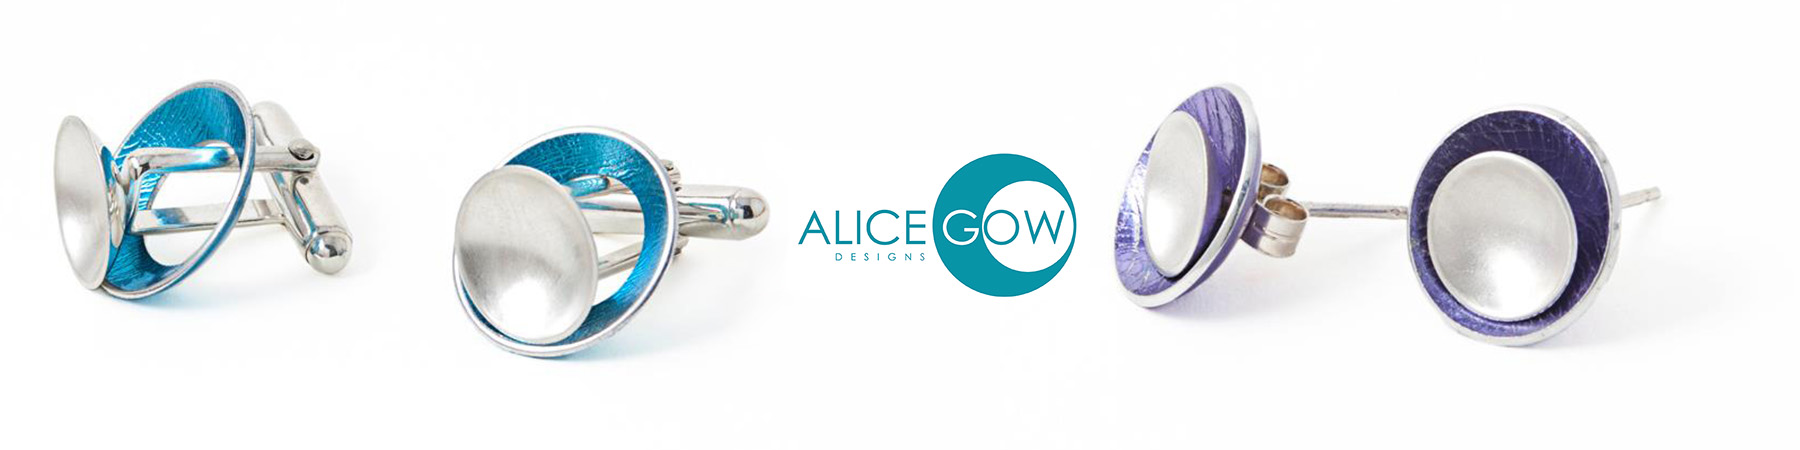 Alice Gow Designs banner image